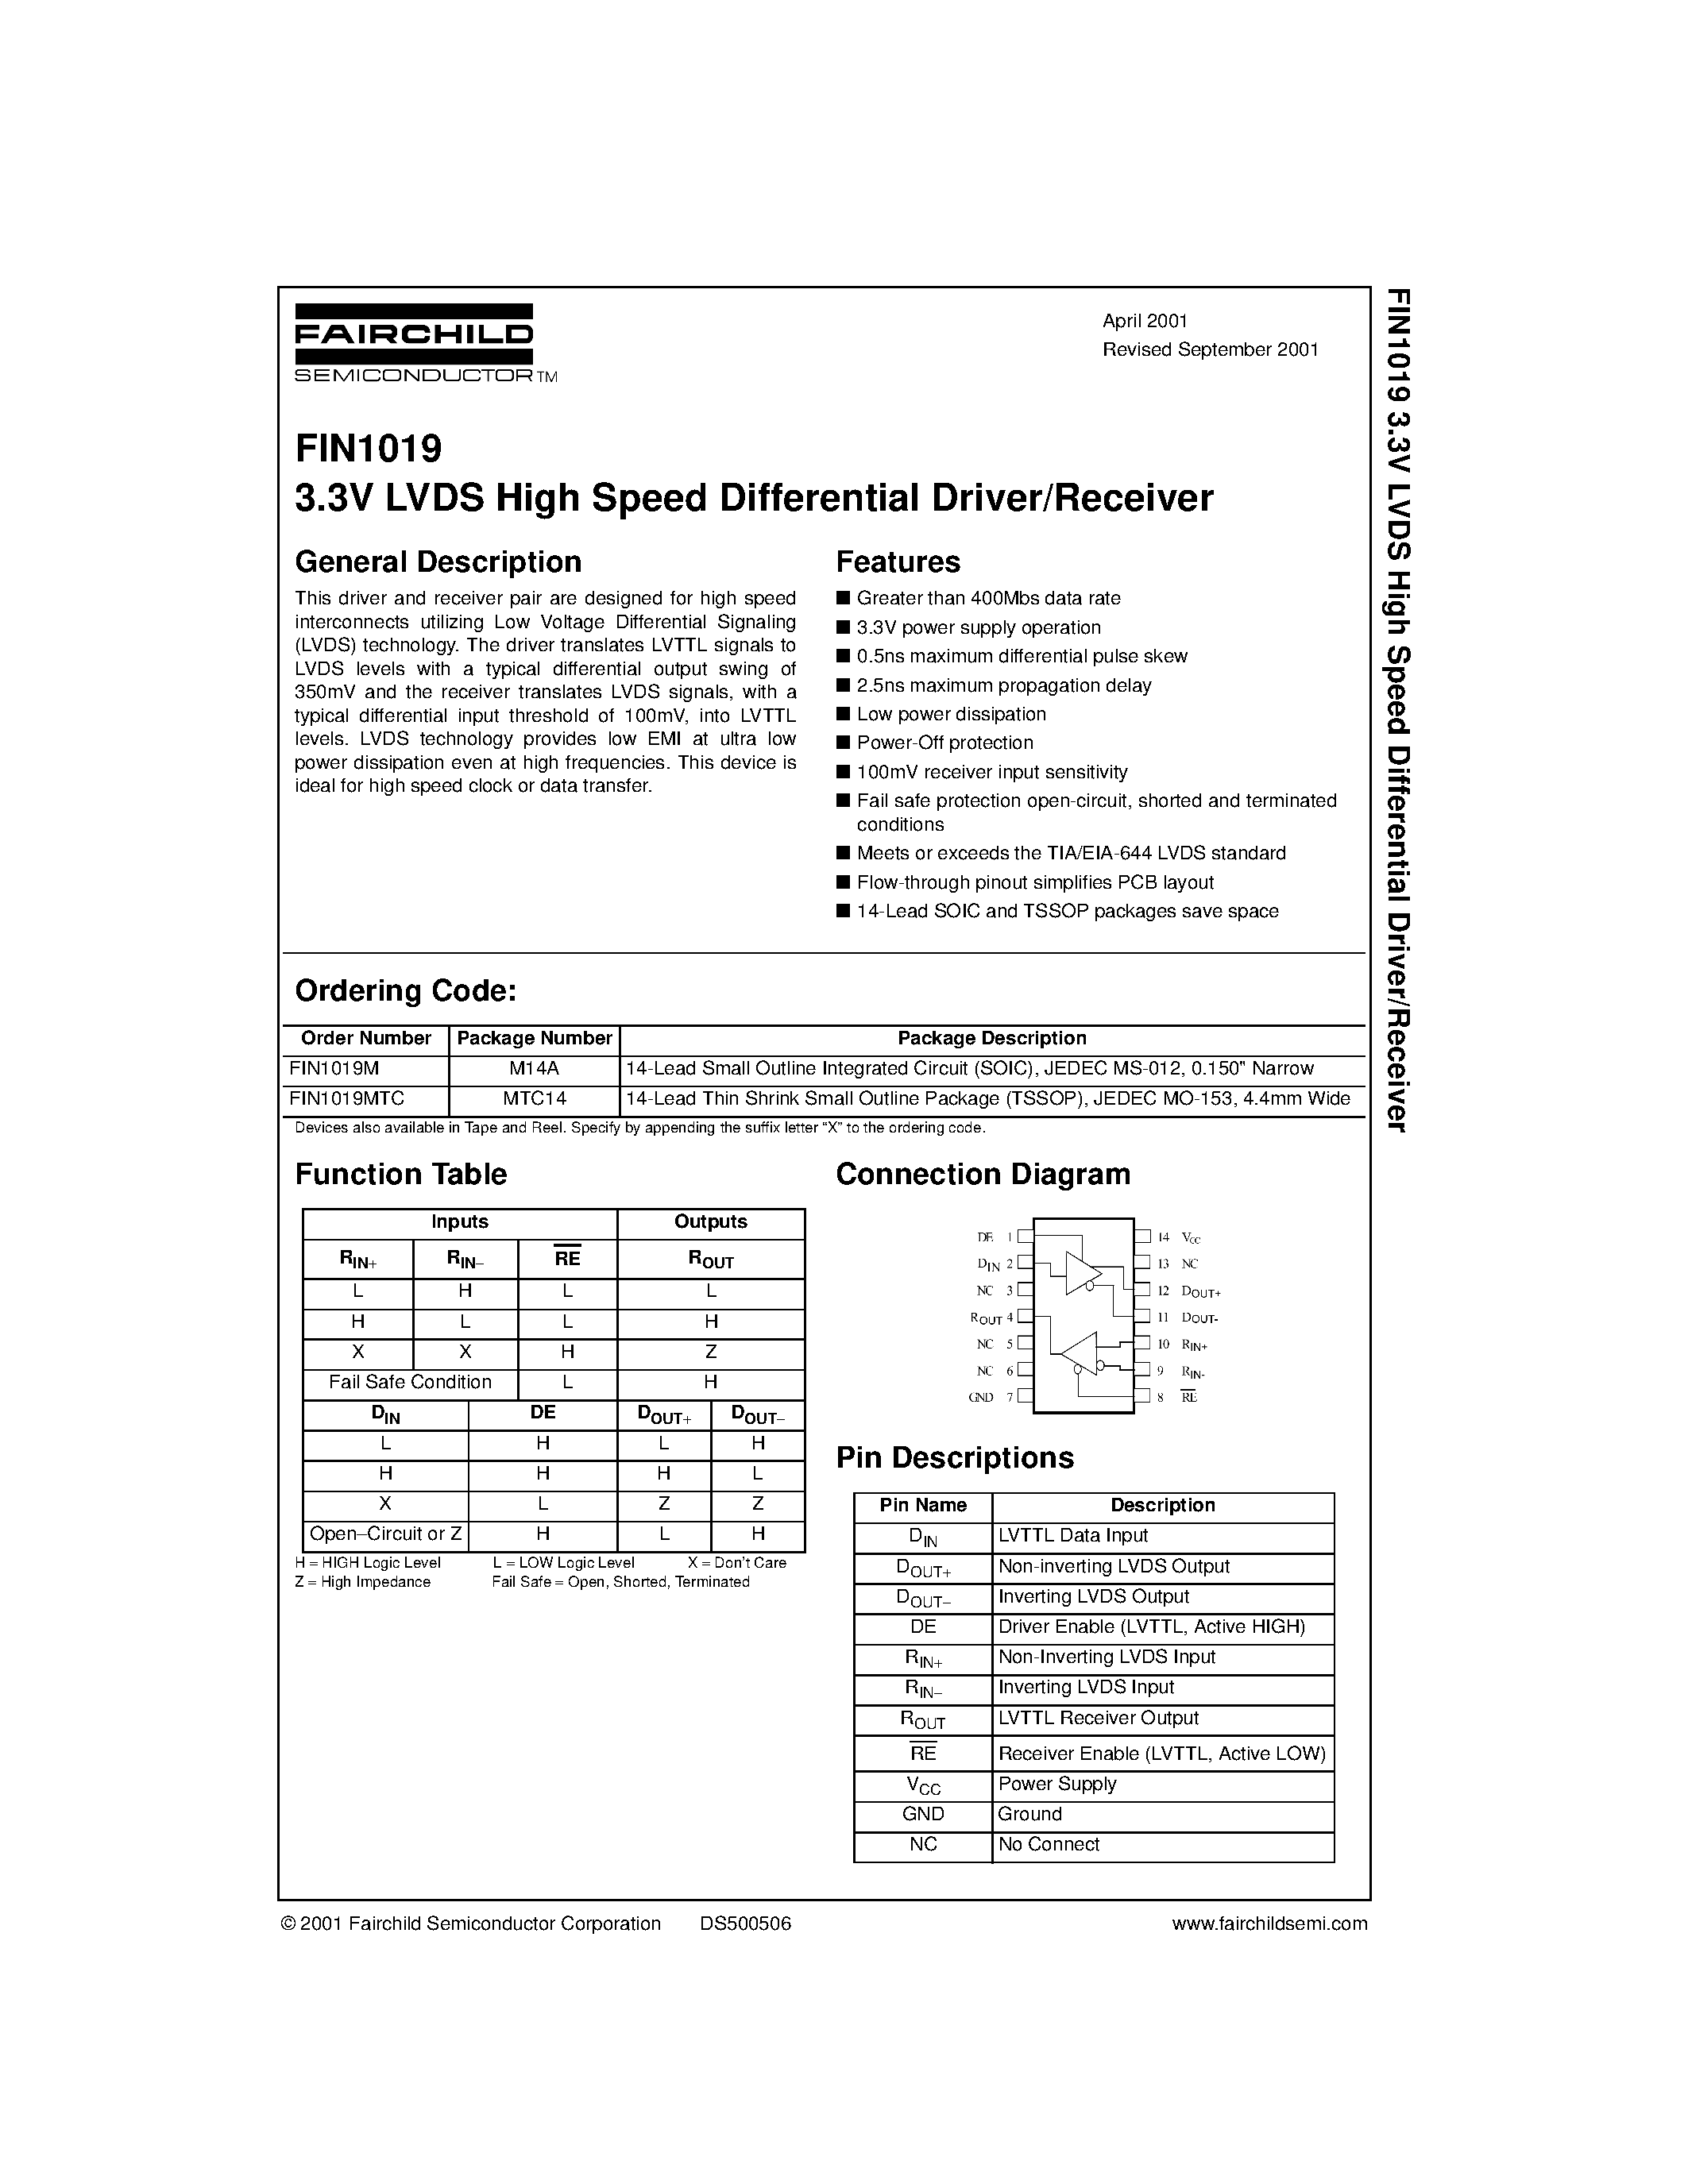 Datasheet FIN1019 - 3.3V LVDS High Speed Differential Driver/Receiver page 1